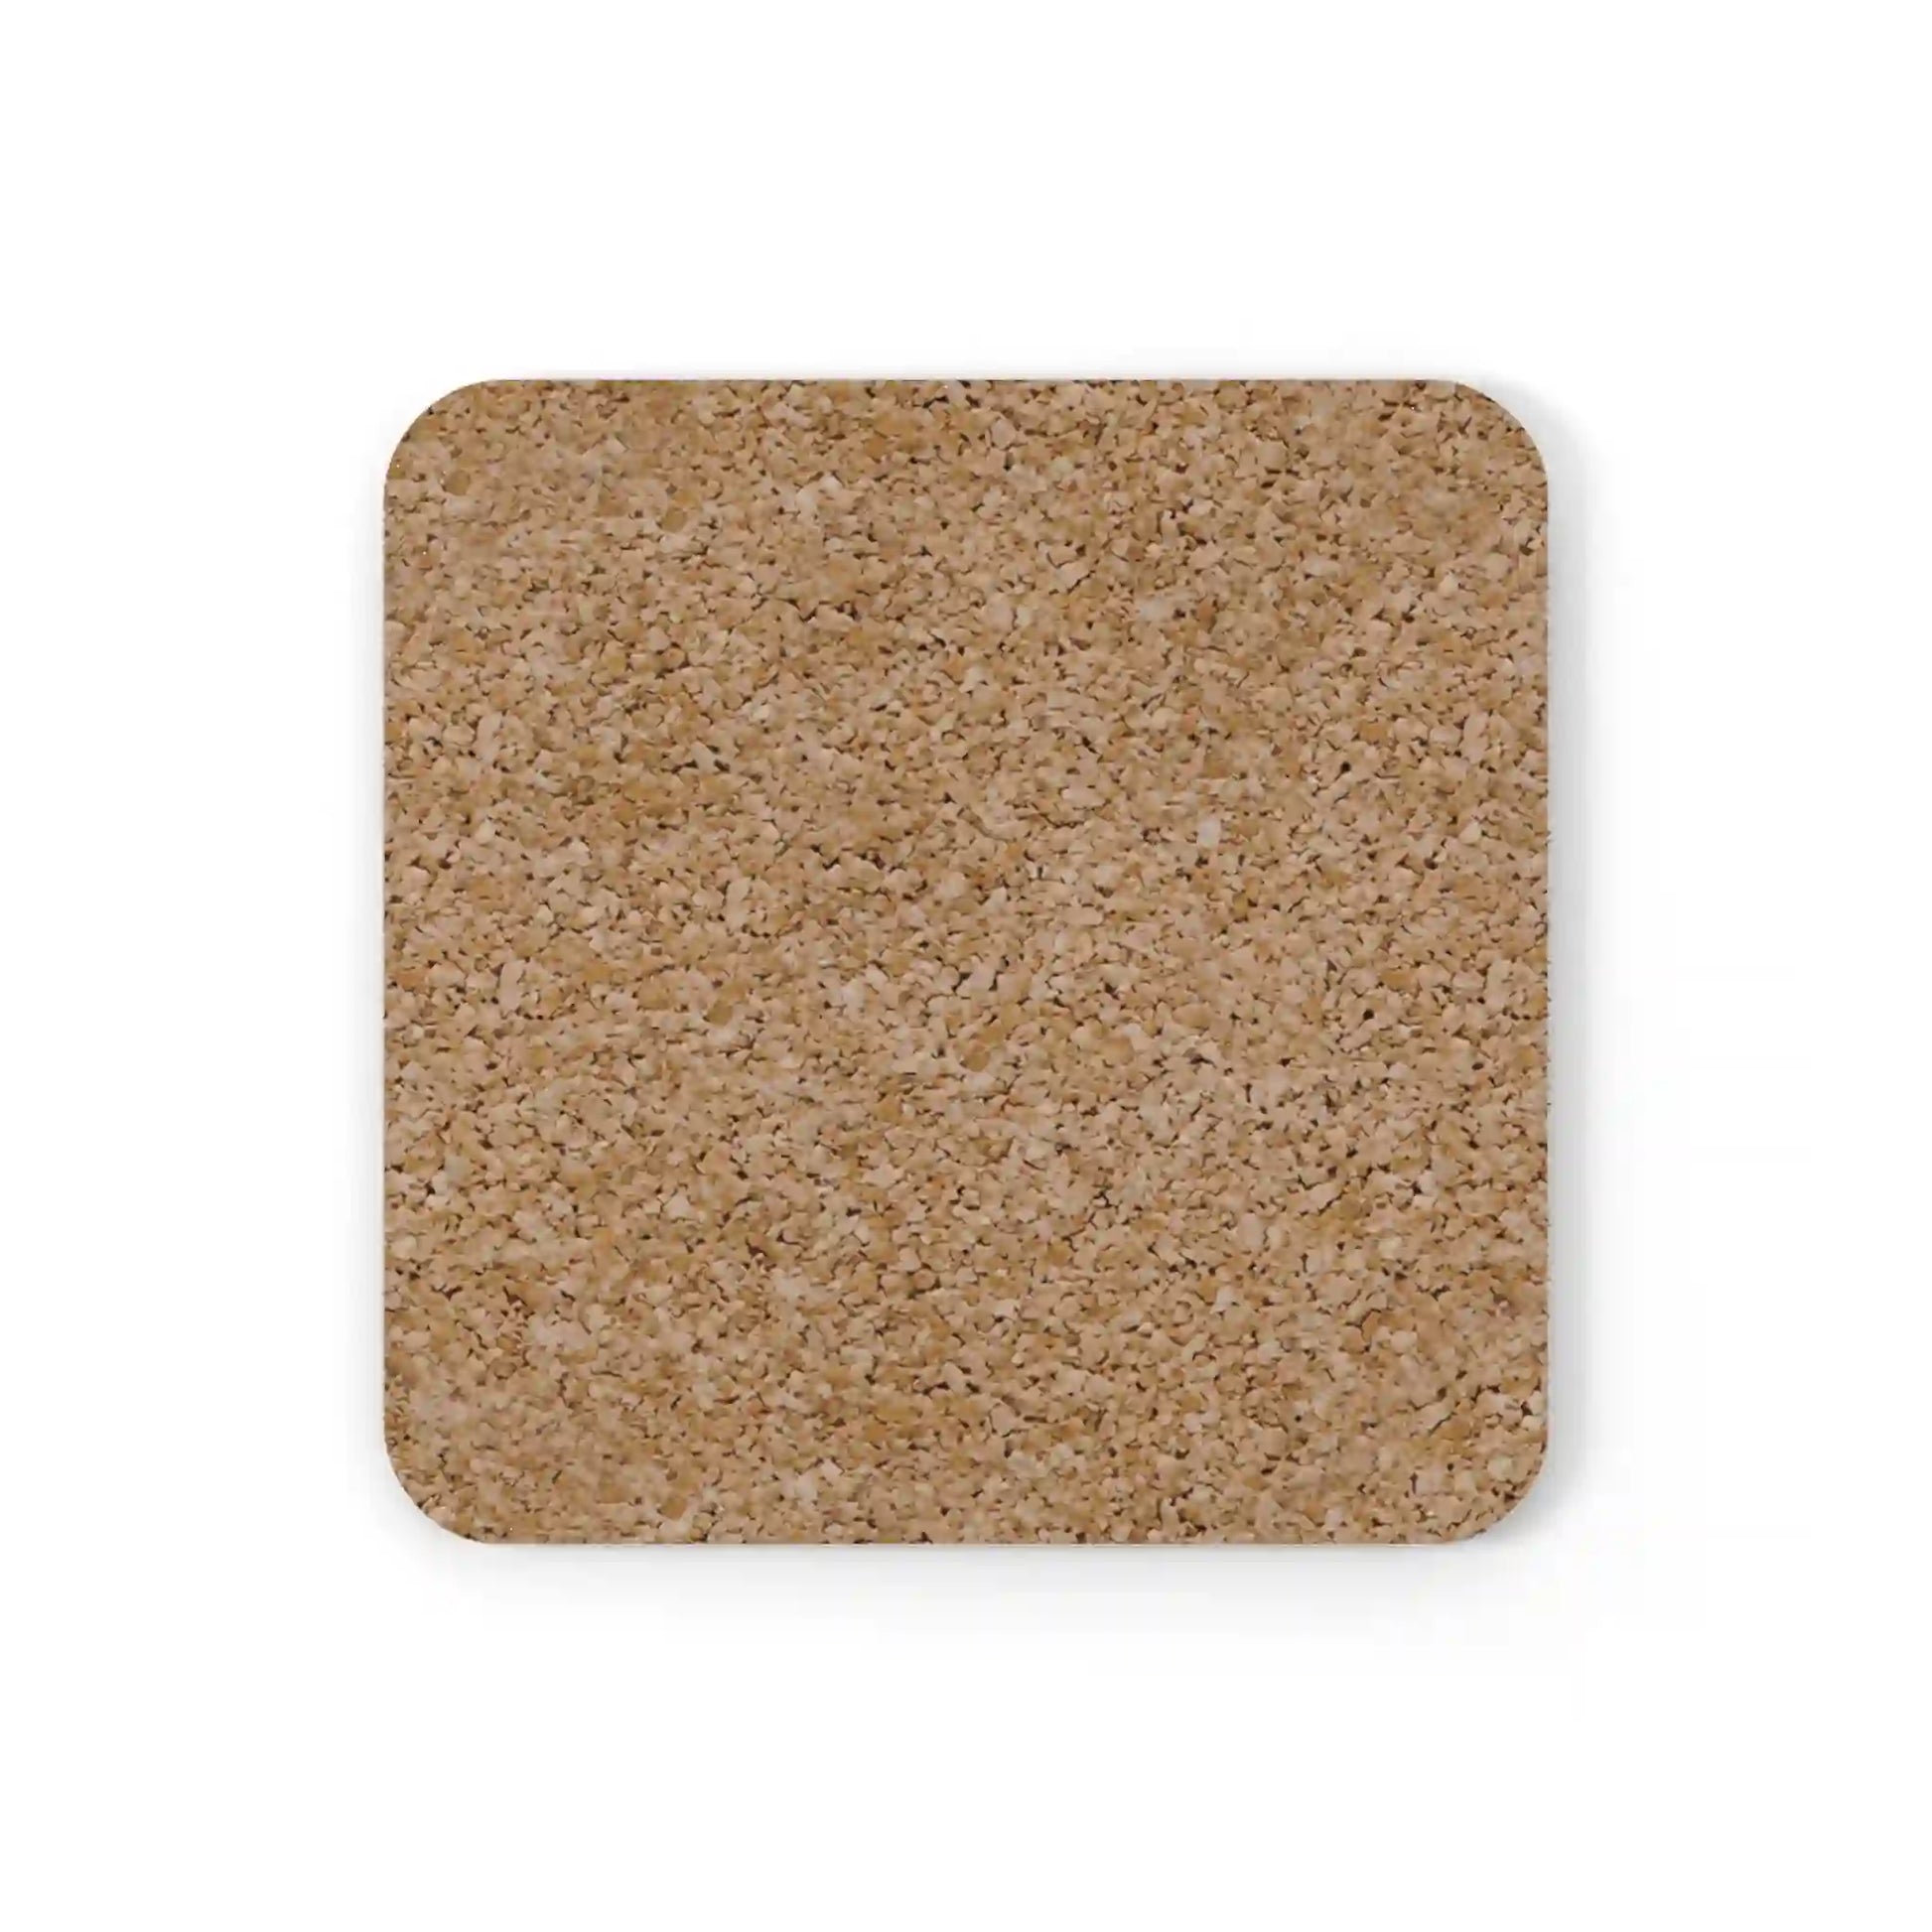 Non-slip premium cork coaster, furniture protection (Happy doctor's day, with personalized name)